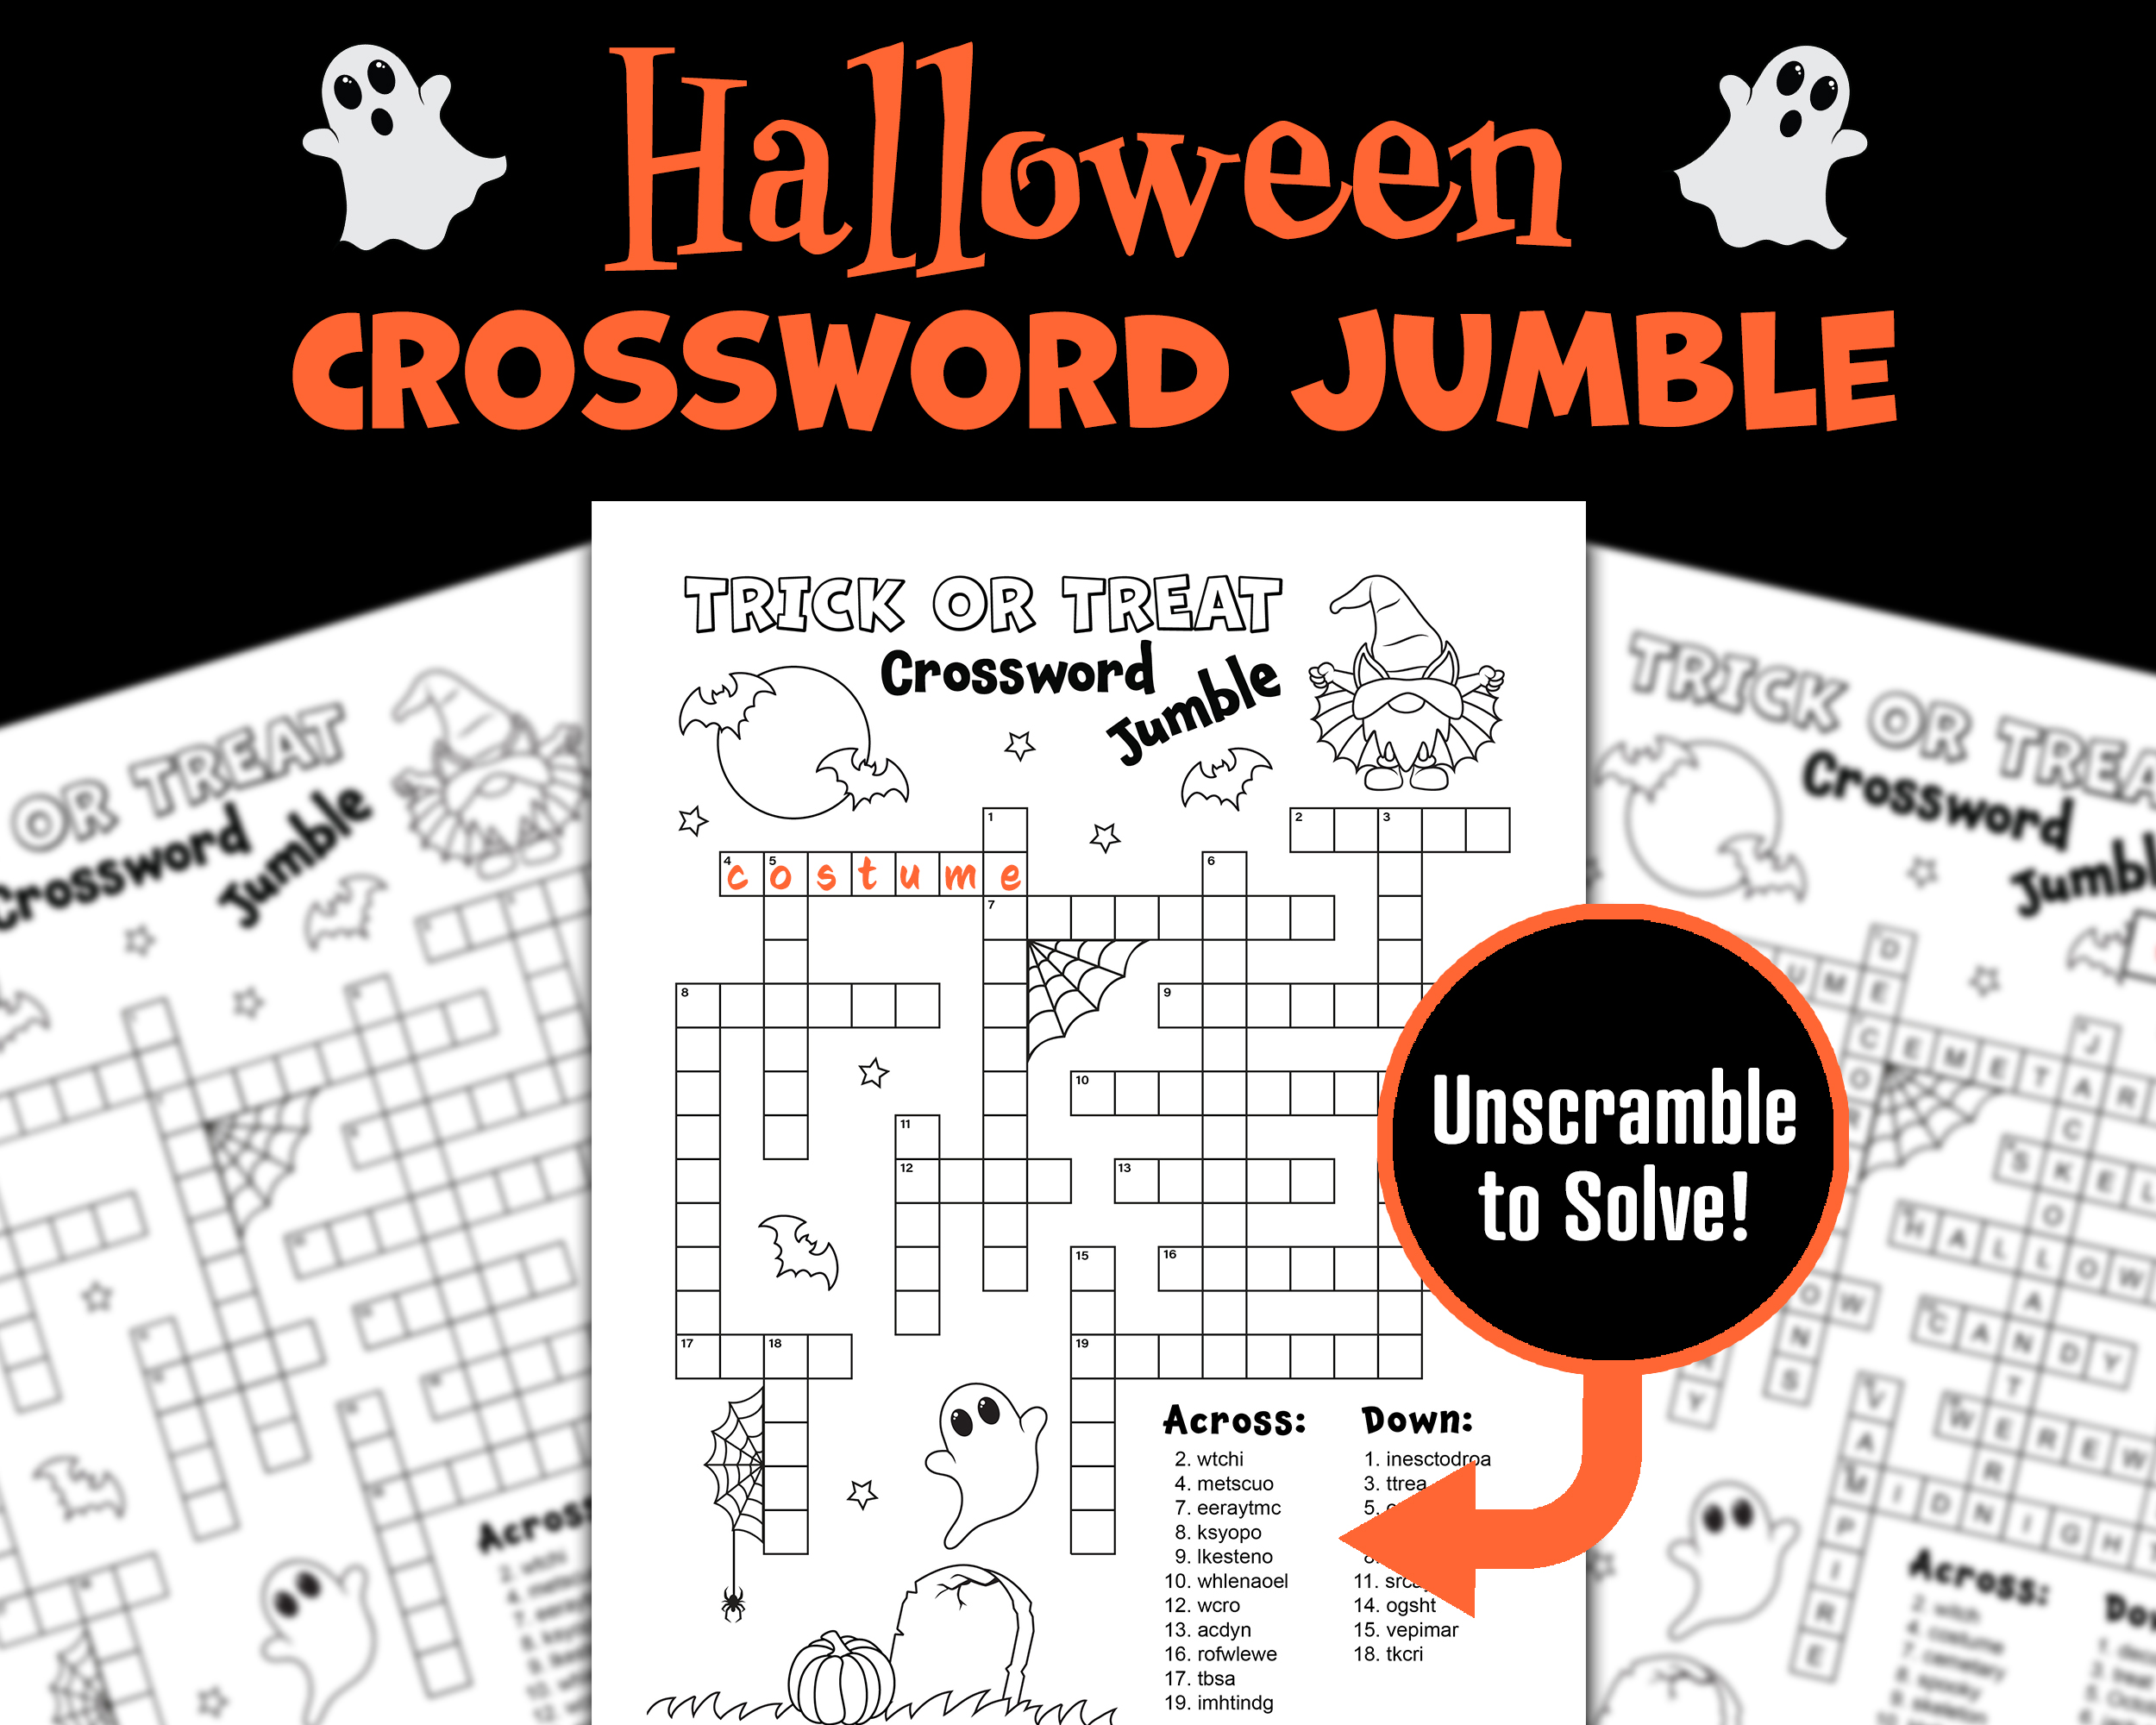 jumble and crossword solver